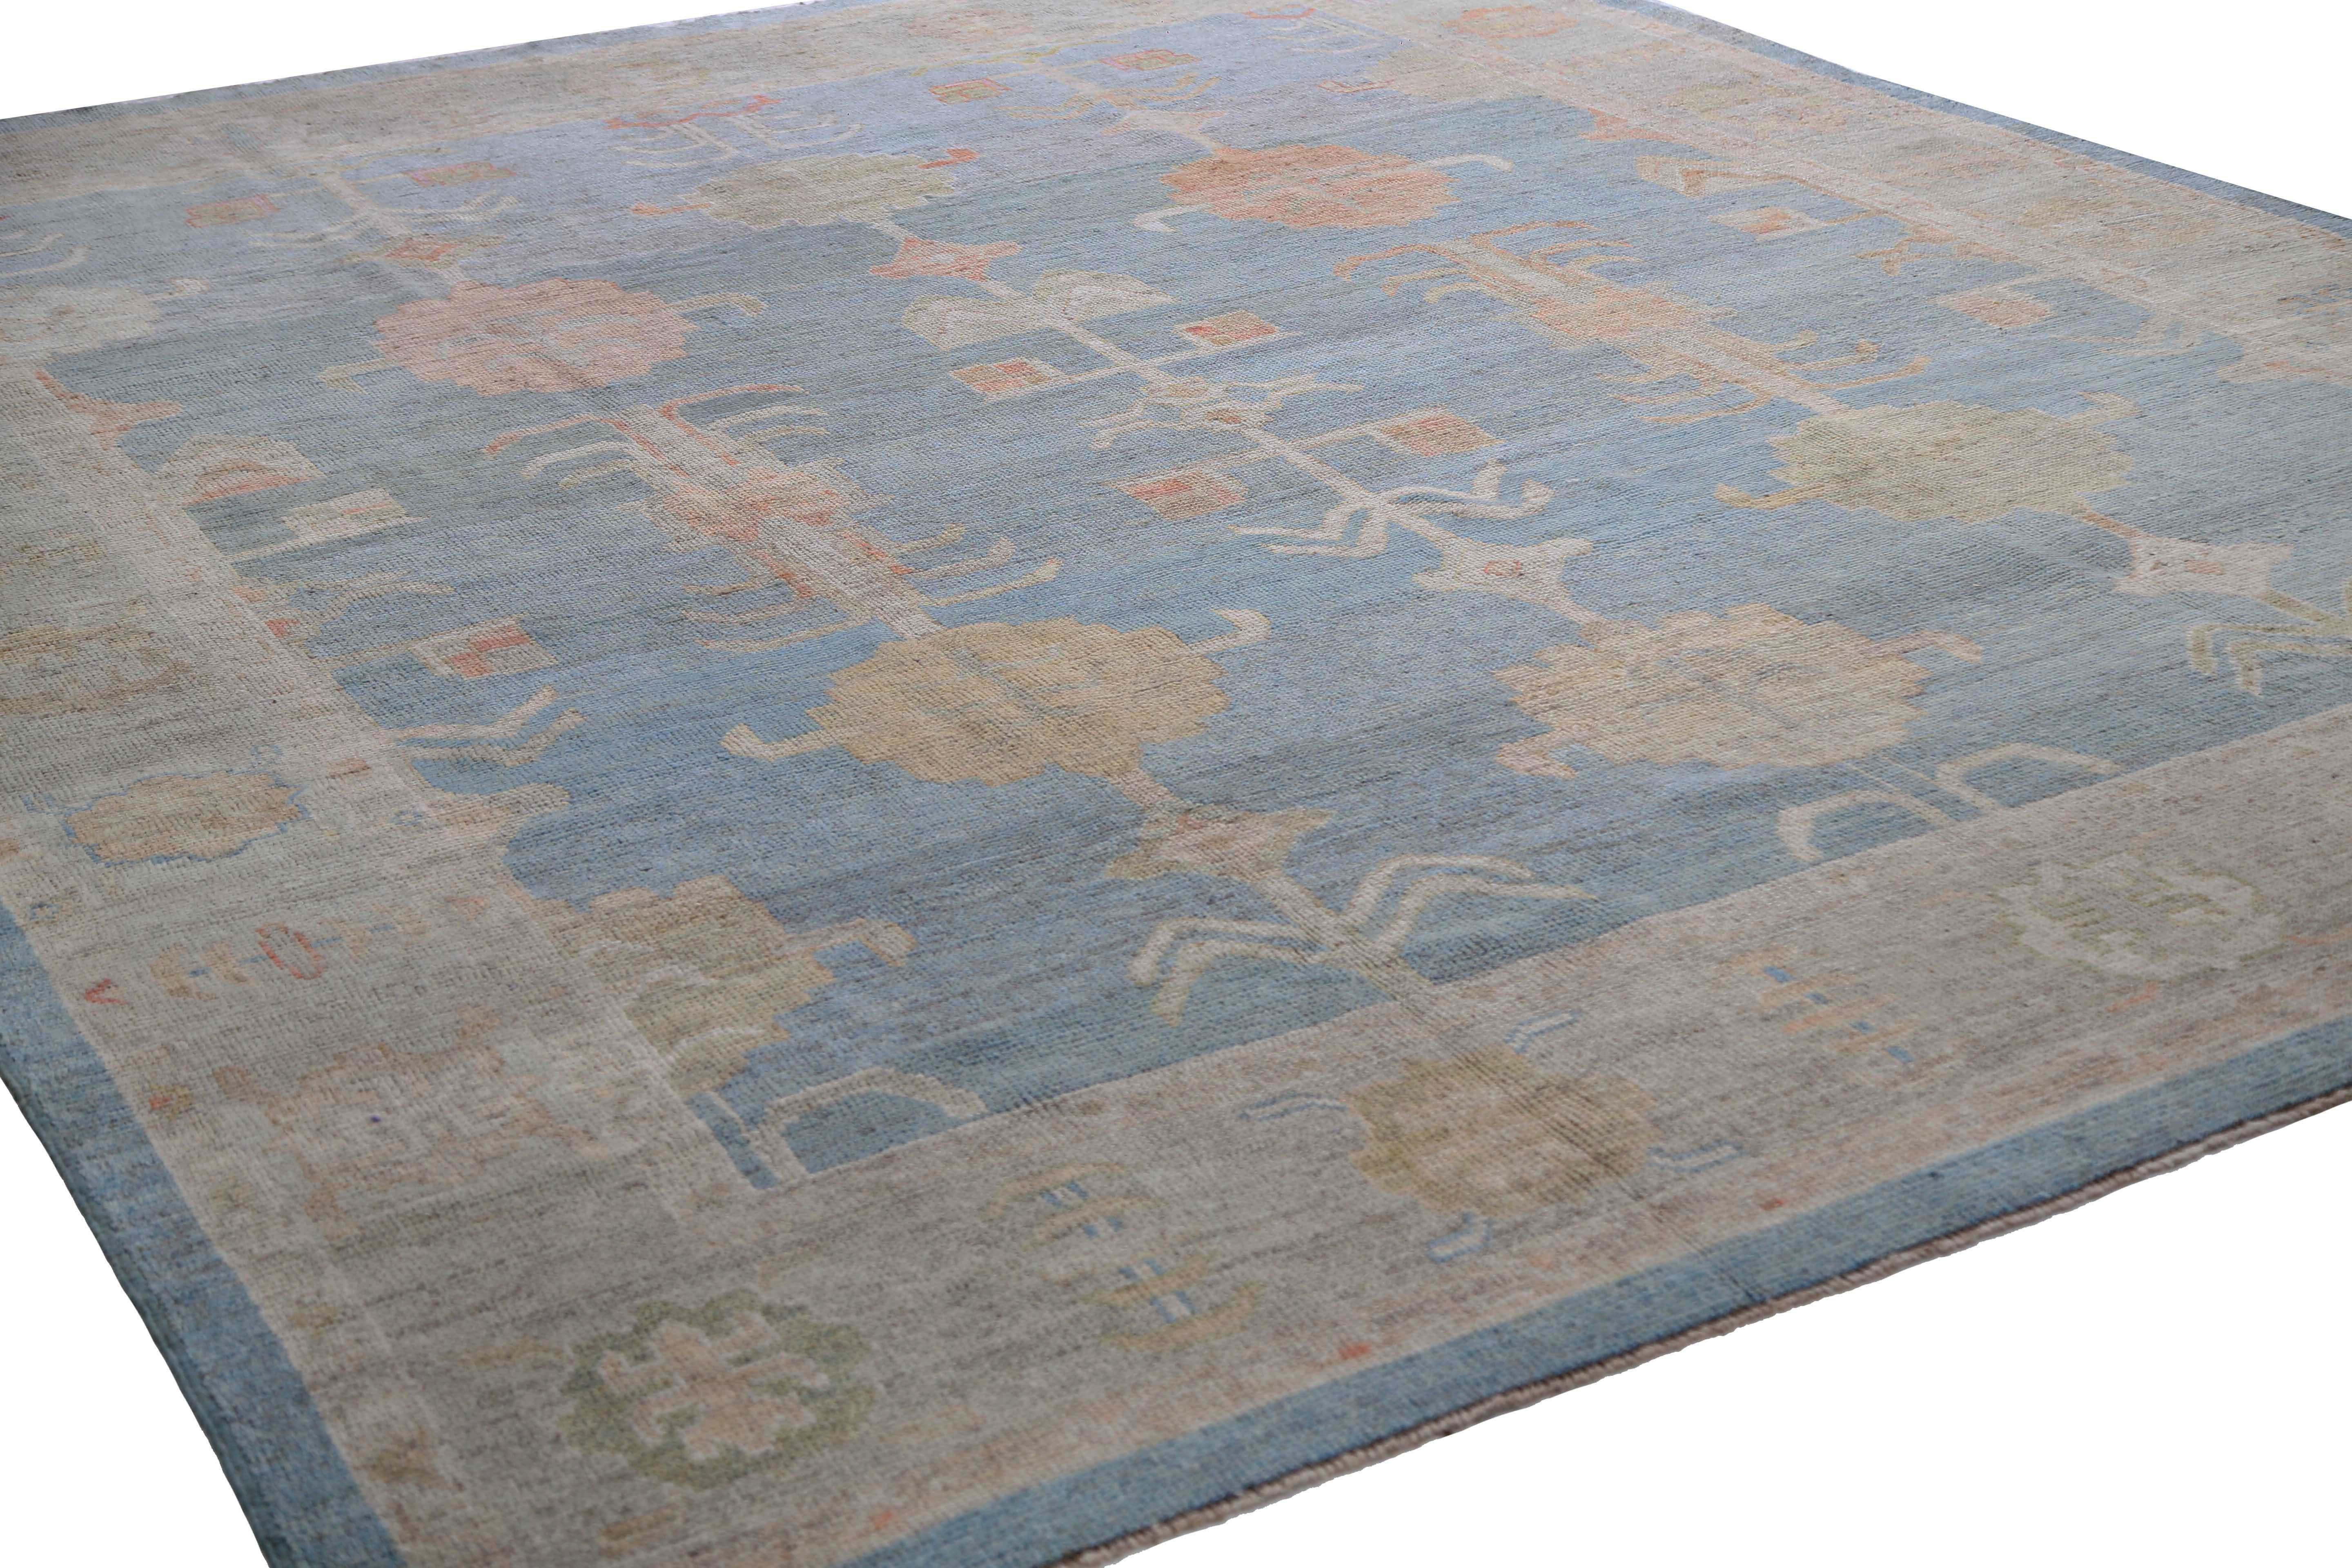 Introducing our stunning Turkish Oushak rug, measuring 10'1'' by 13'0''. This rug boasts a beautiful light blue background that perfectly complements the pops of muted colors such as green, orange, and yellow, making it a perfect addition to any